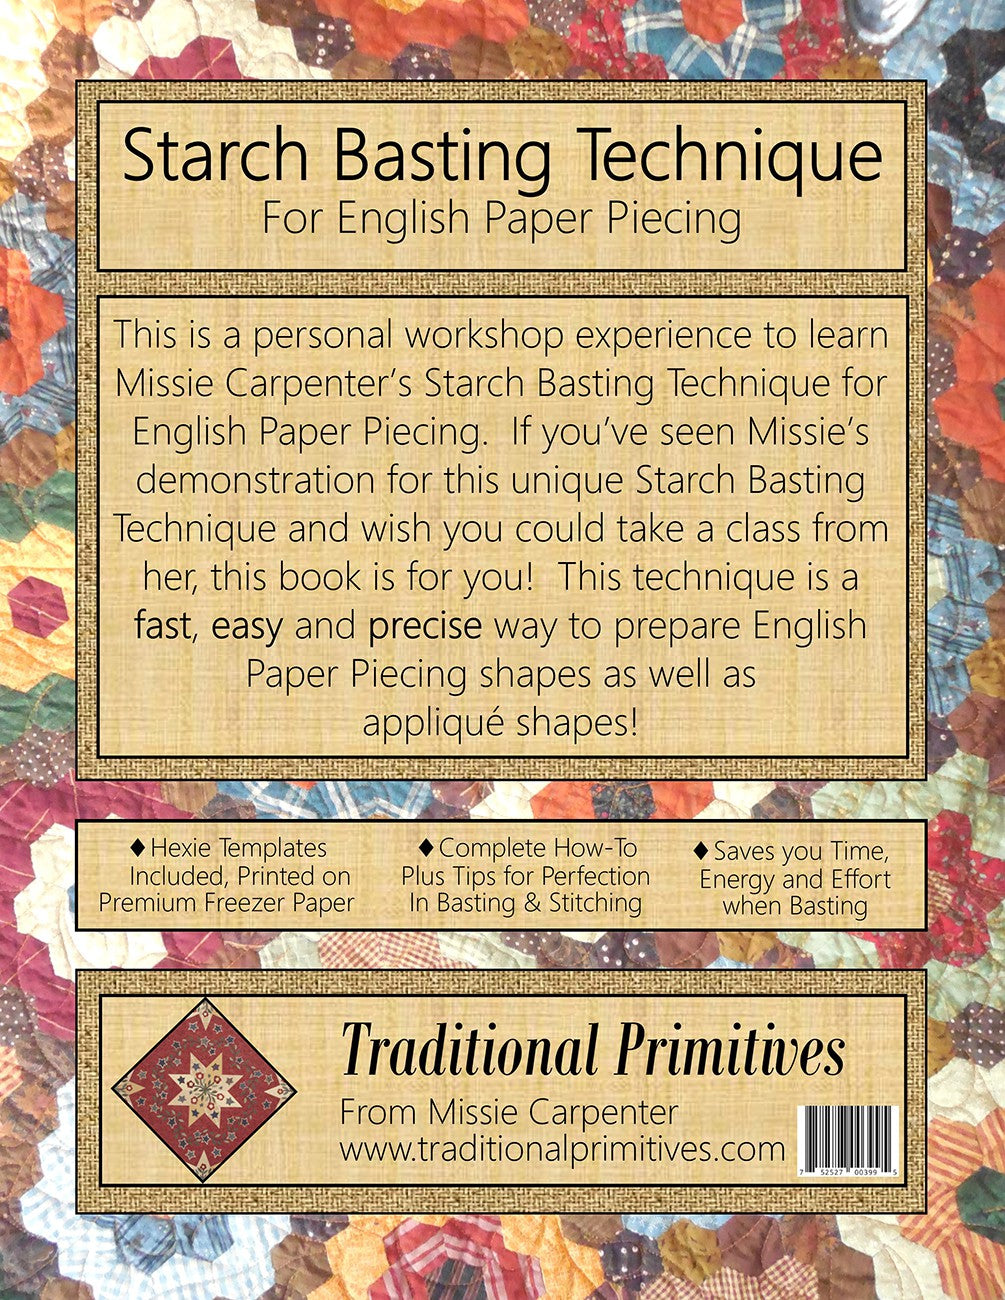 Starch Basting Technique for English Paper Piecing by Missie Carpenter of Traditional Primitives